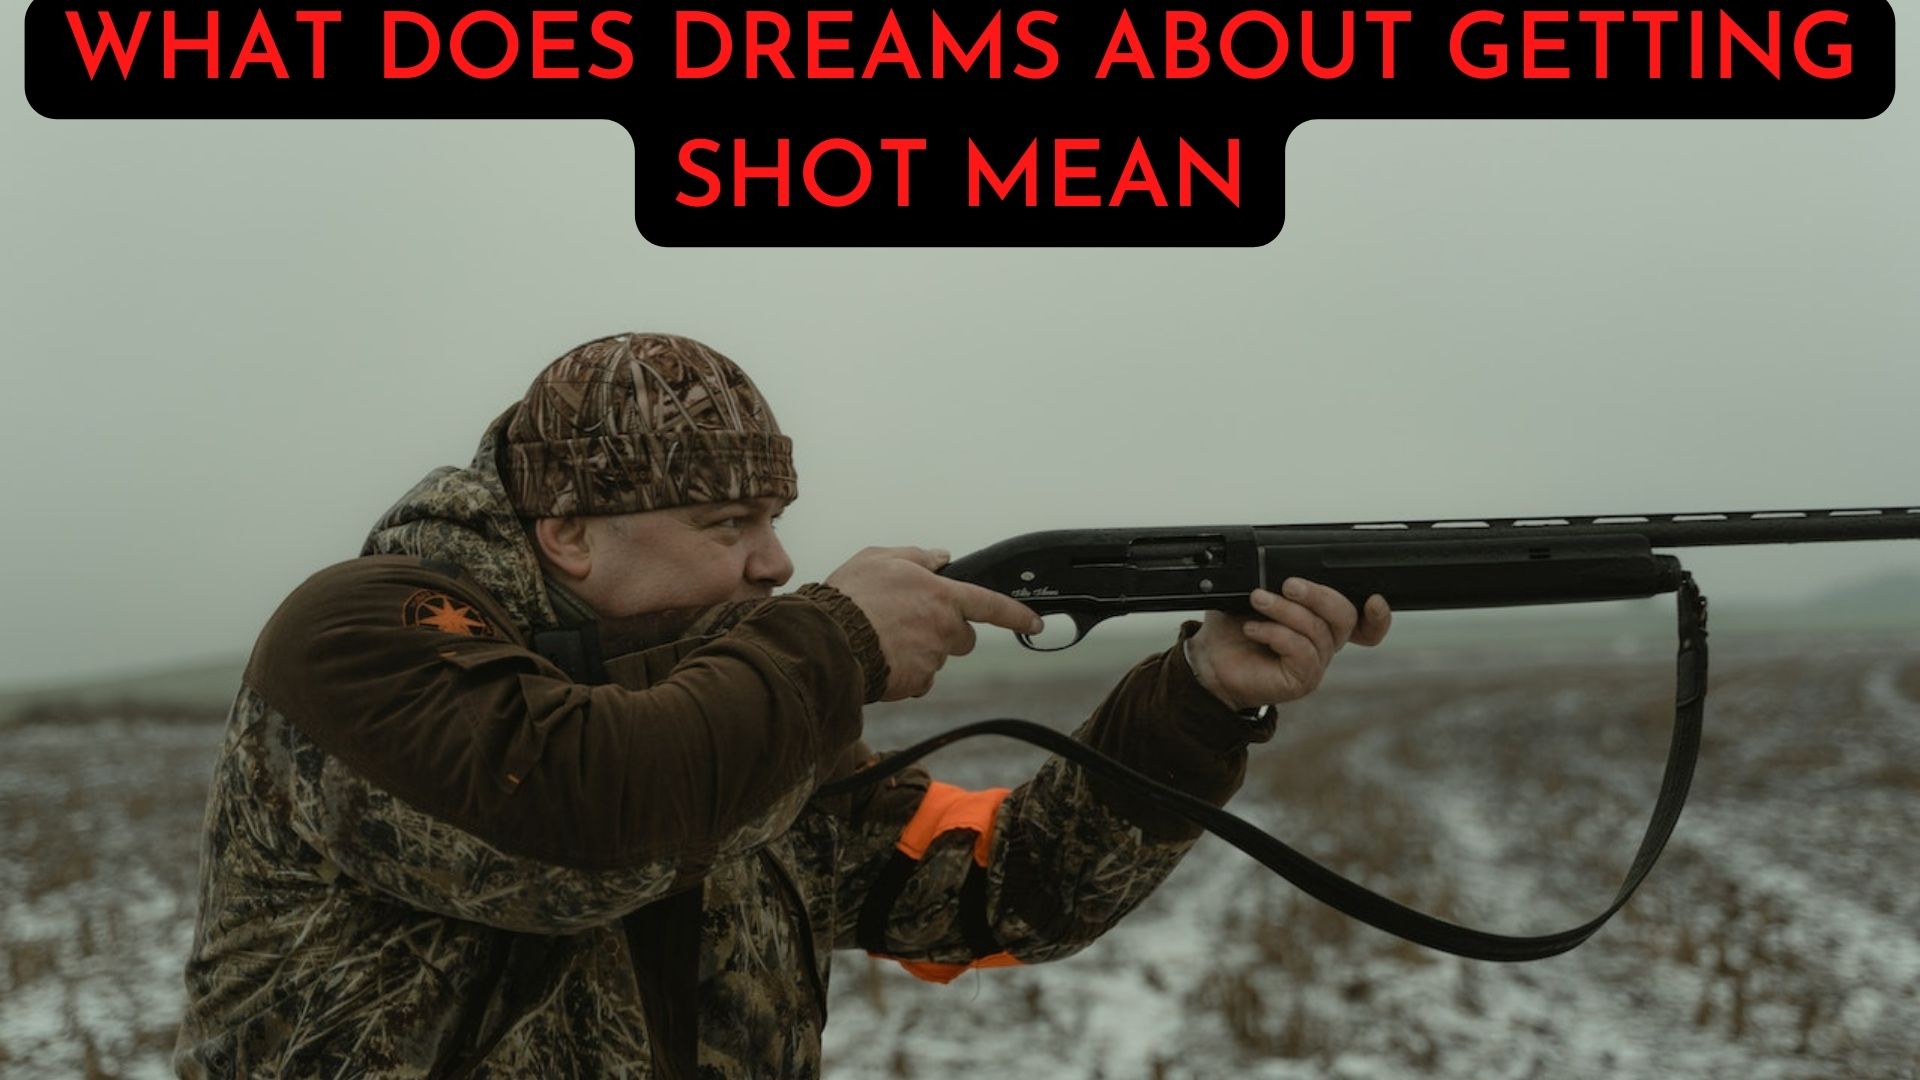 What Does Dreams About Getting Shot Mean?